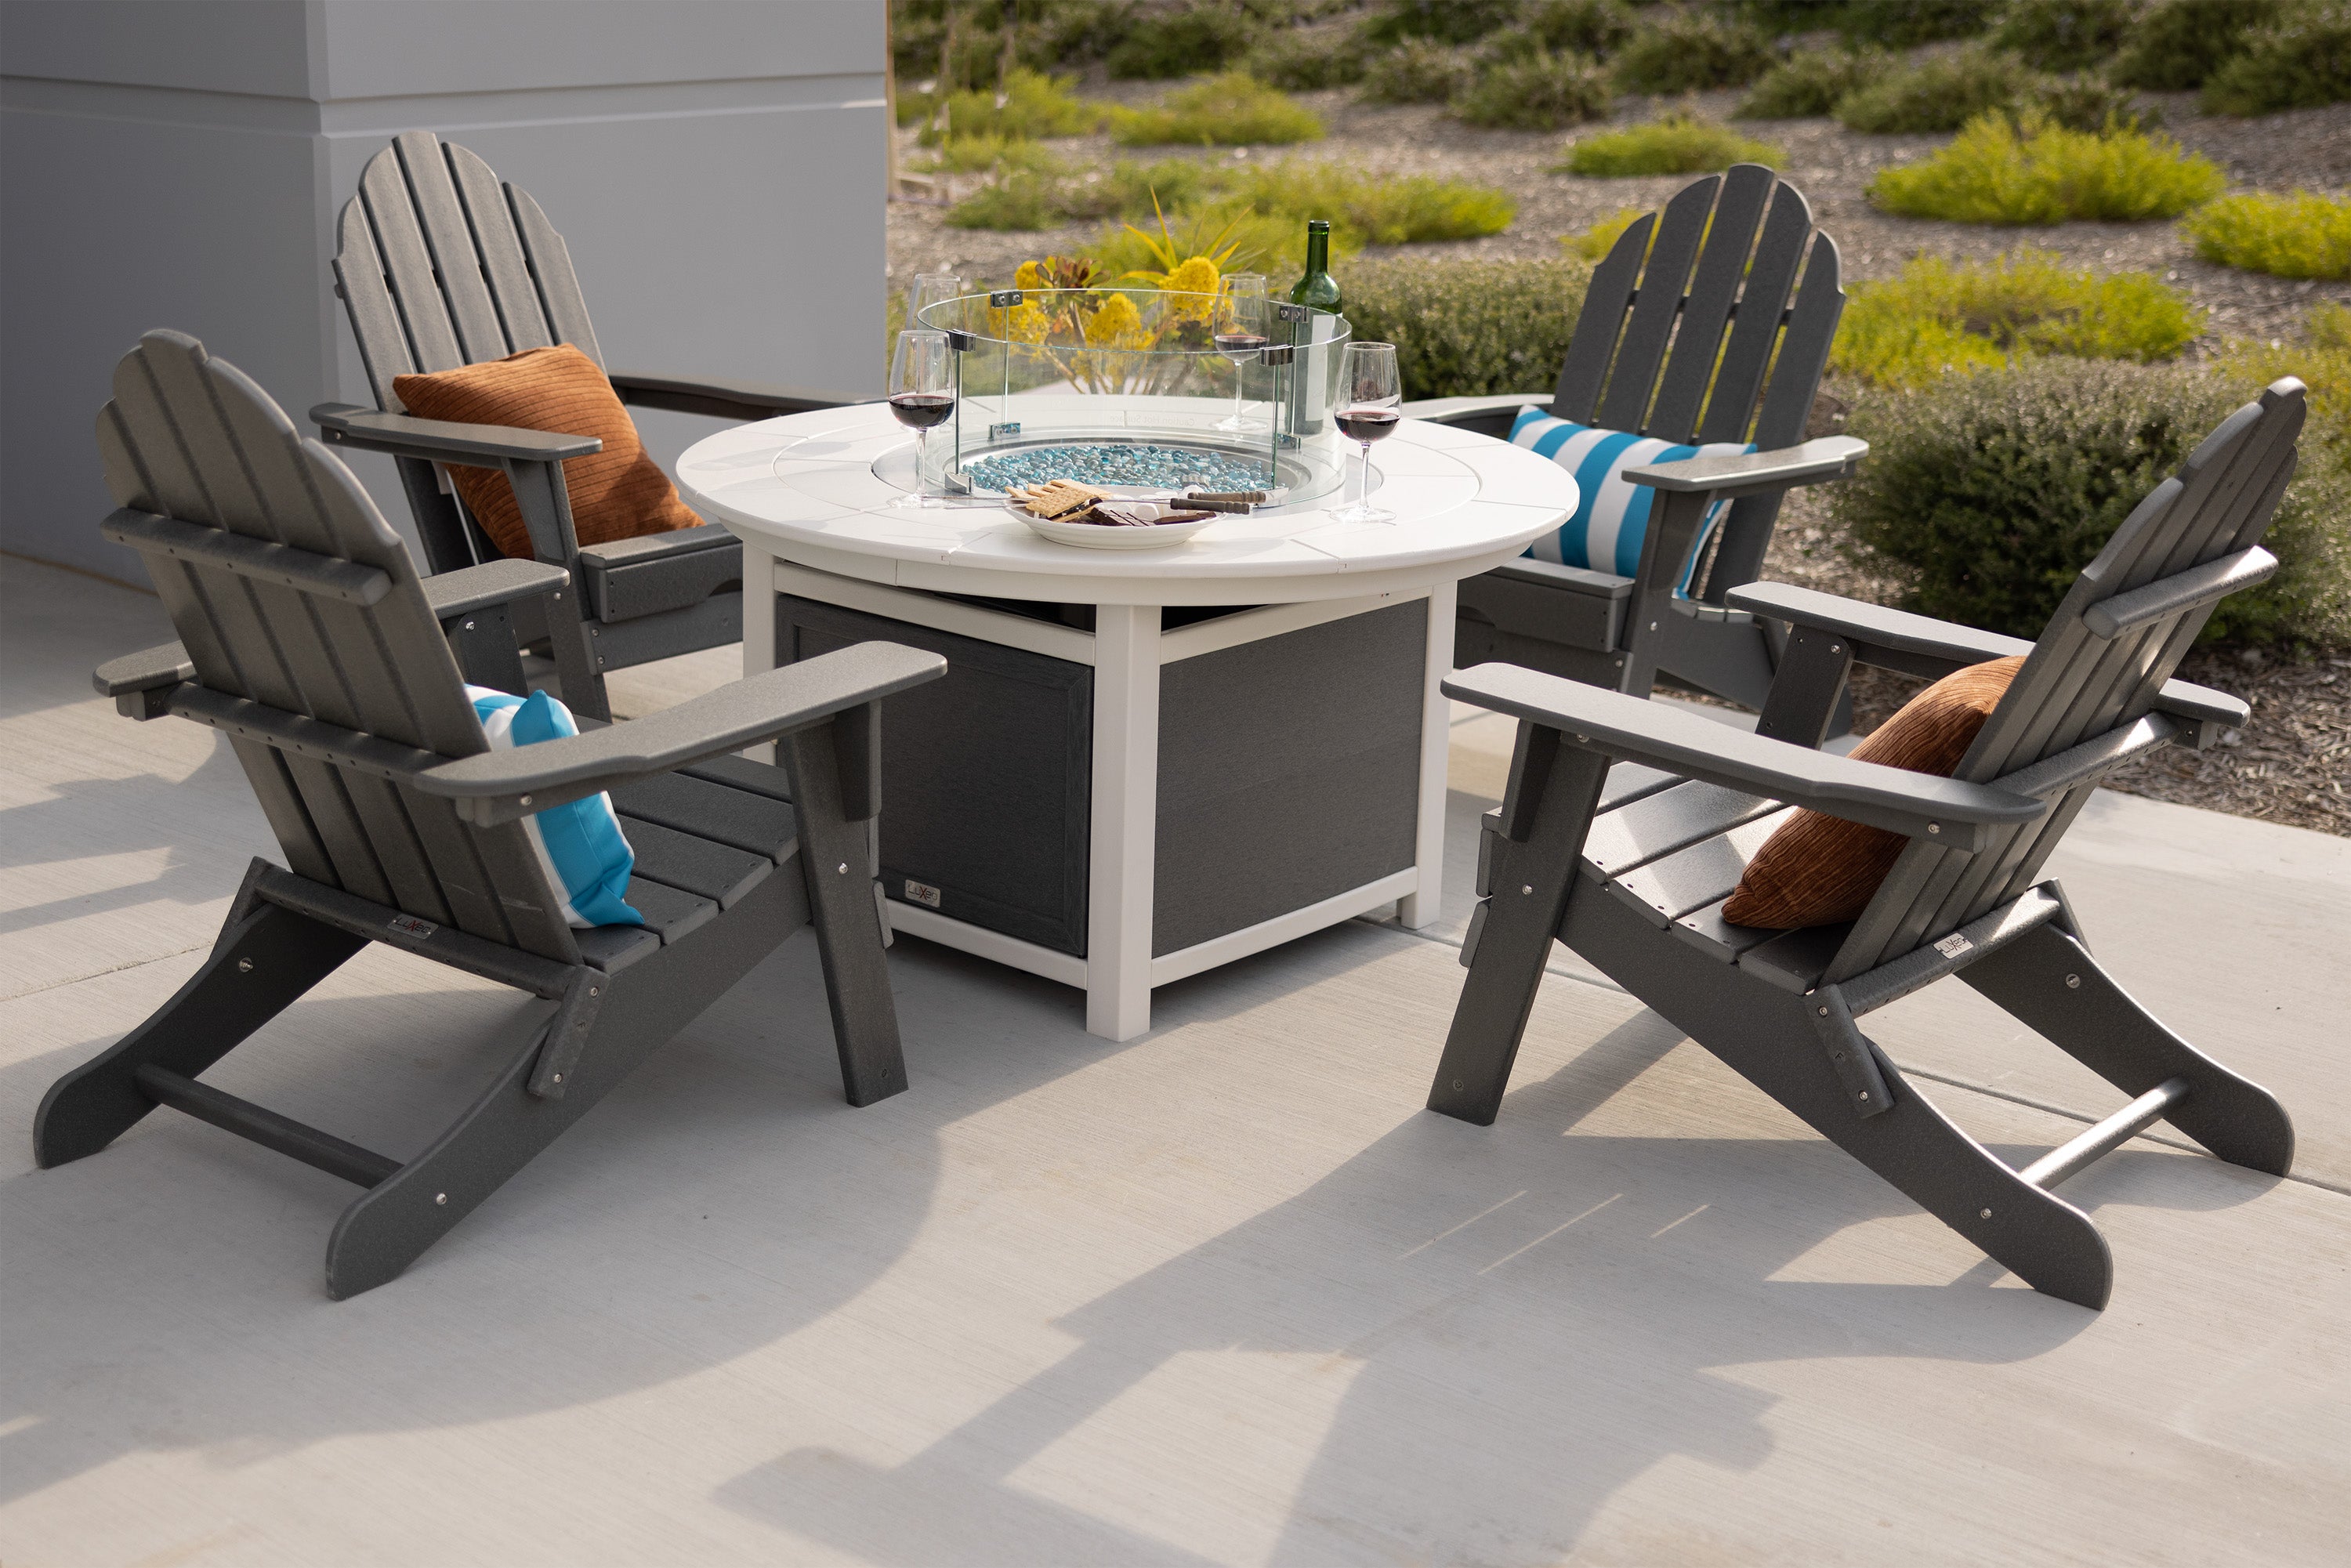 LuXeo Vail 48" Two-Tone Fire Pit Table, Round Top with Four Balboa Chairs